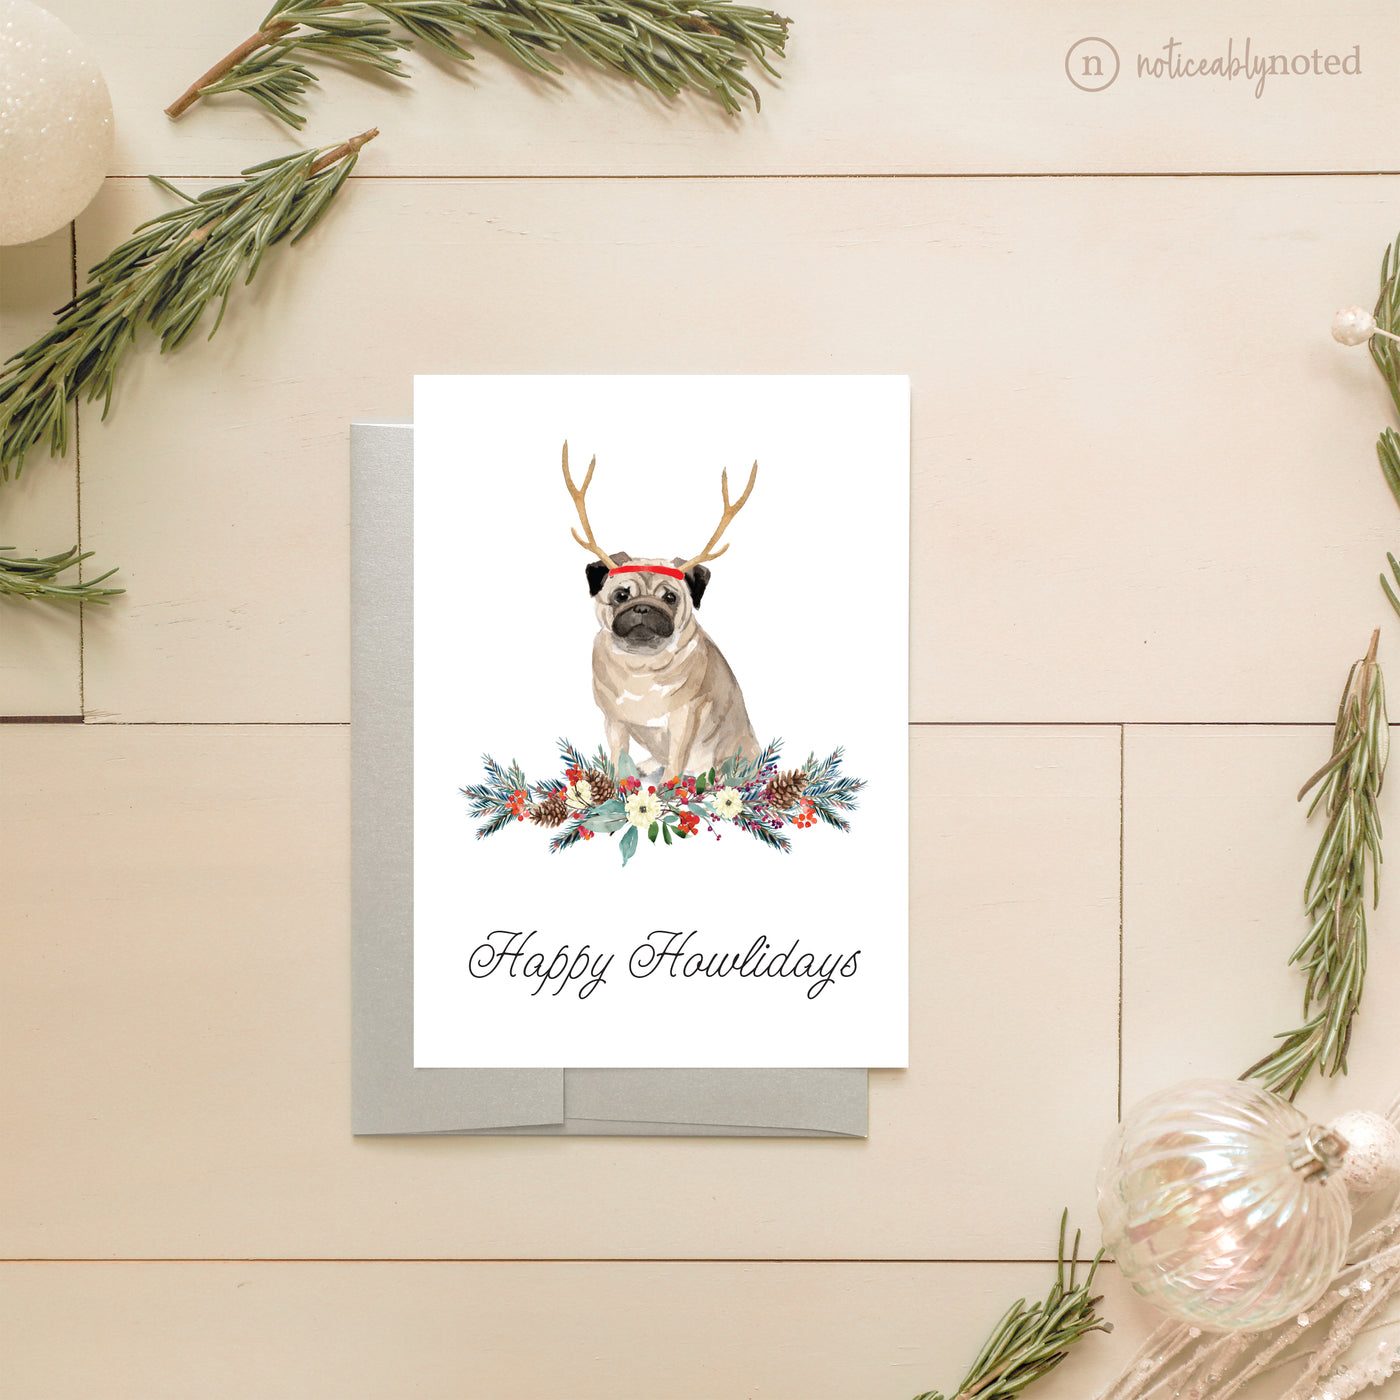 Pug Dog Holiday Card | Noticeably Noted